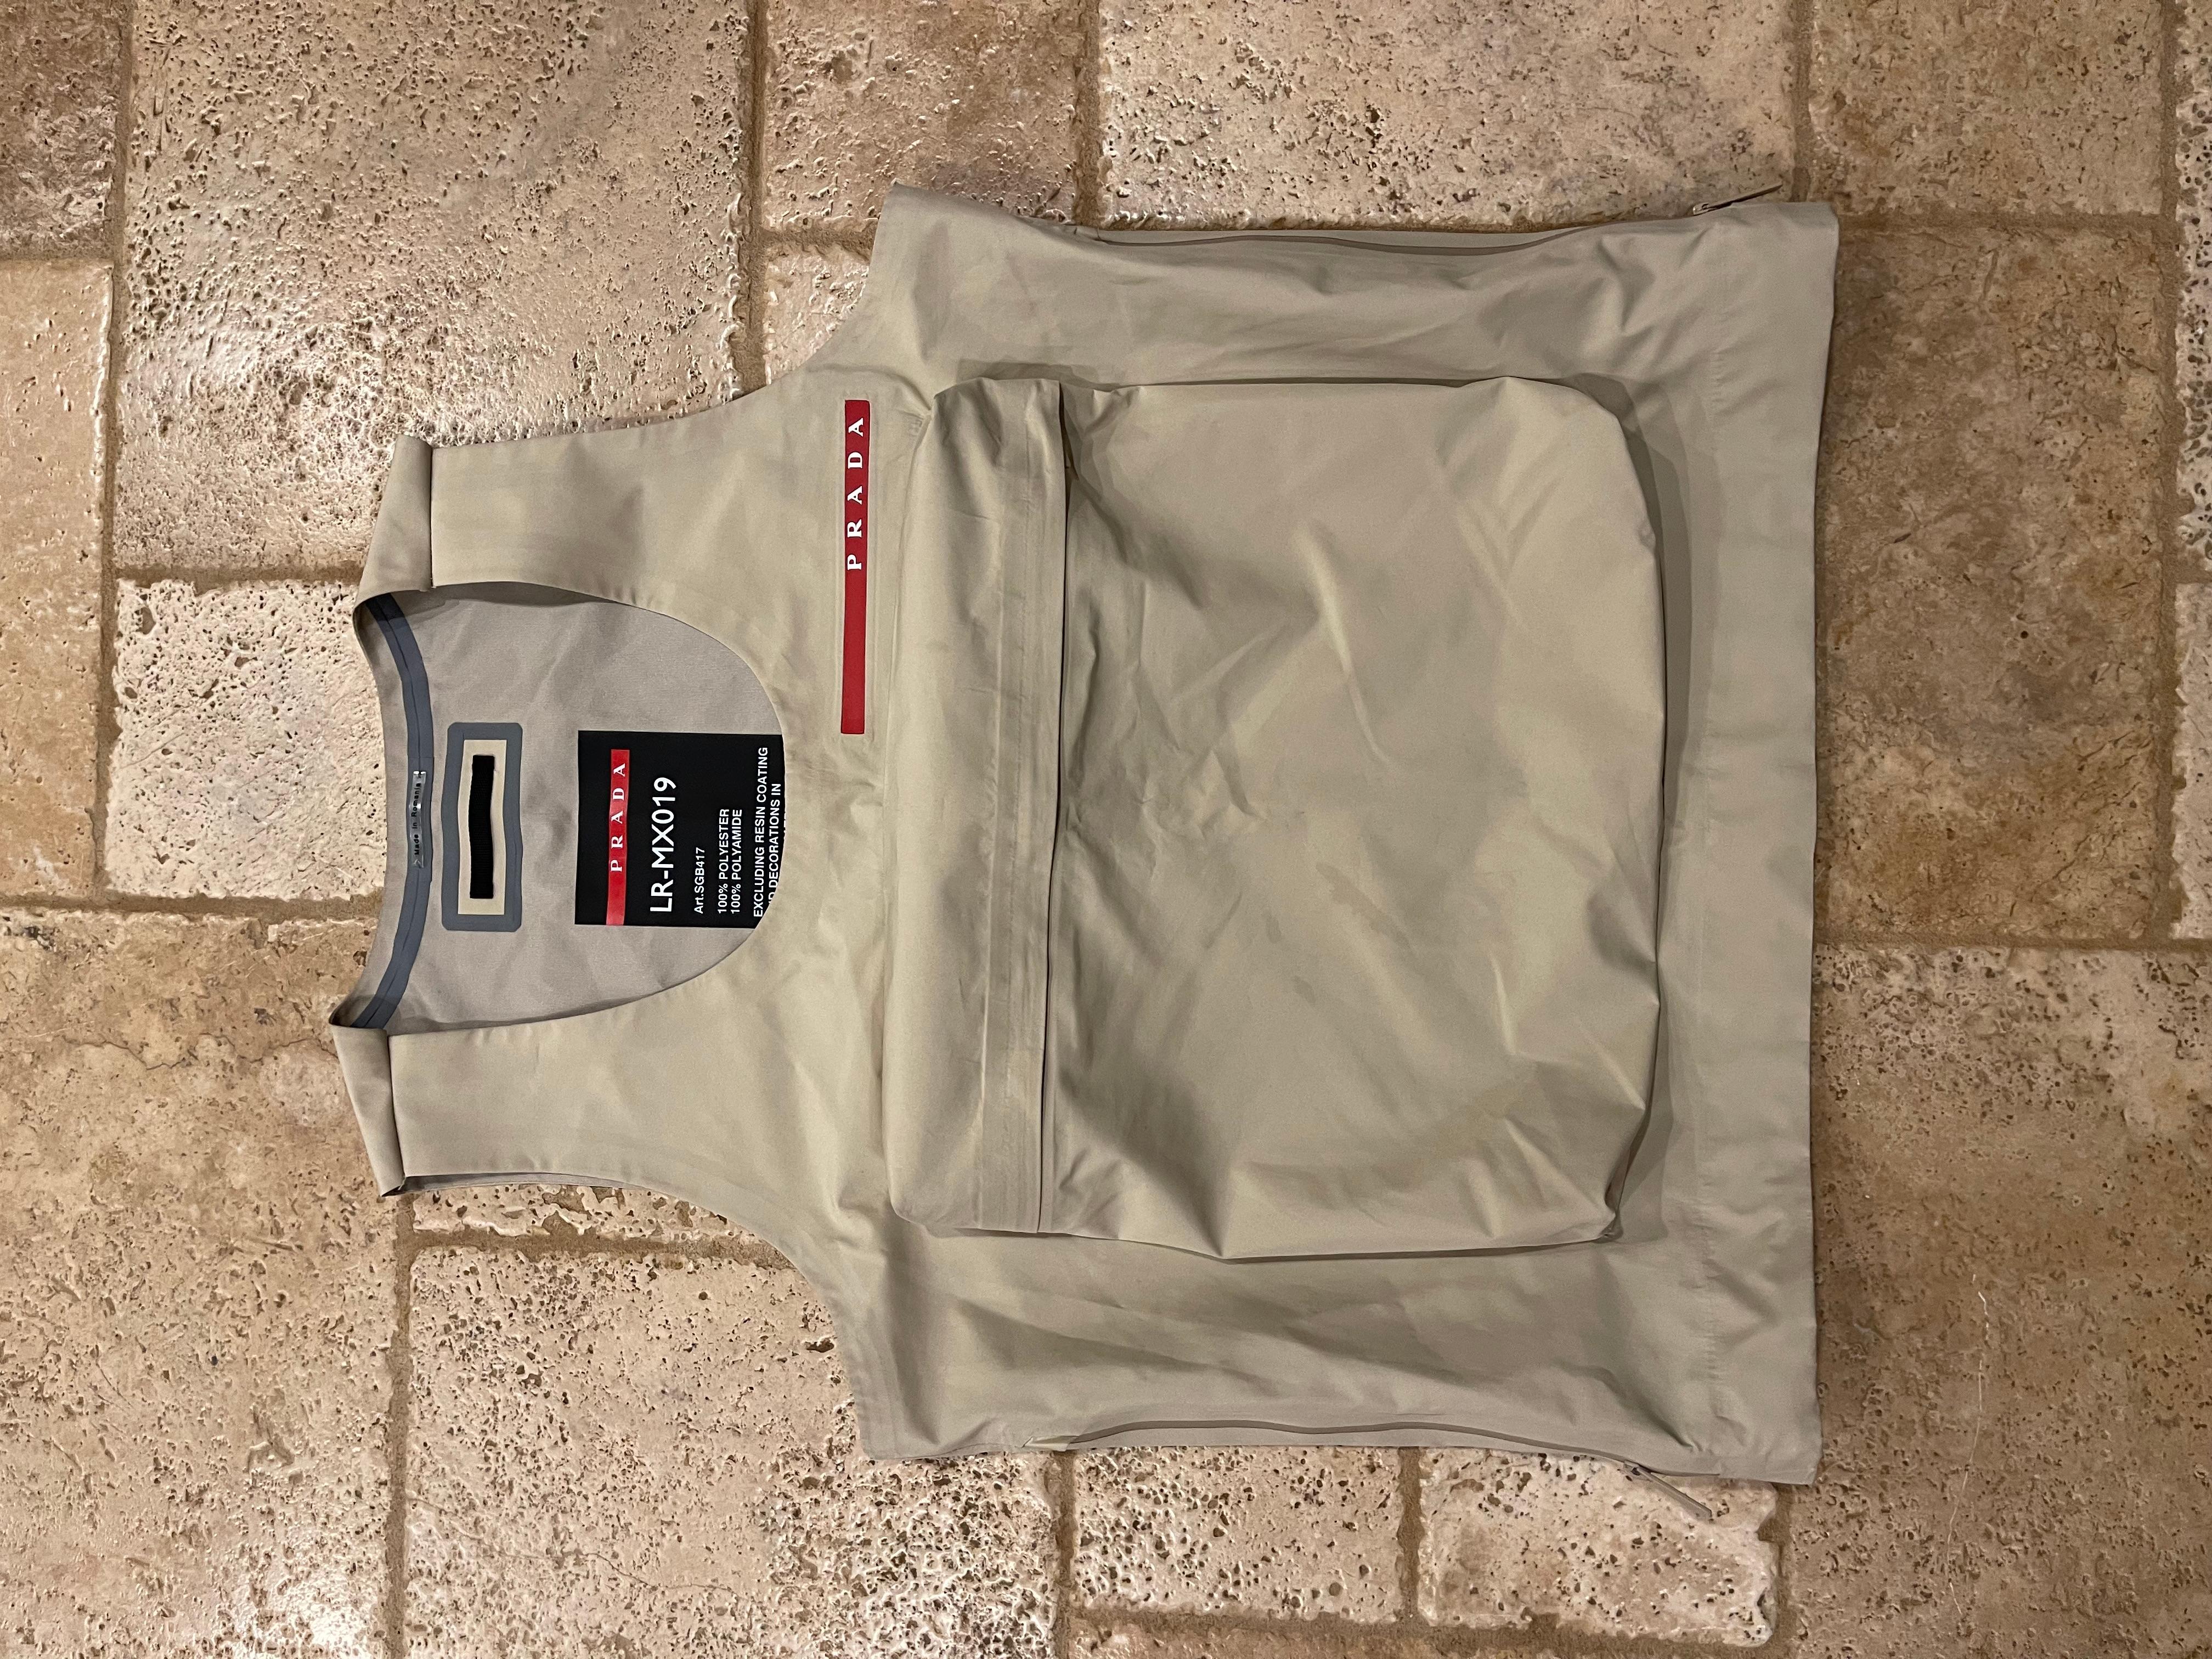 Prada Linea Rossa Cargo Pocket Tan/Beige Vest
Size small (could fit S-L; see measurements)
Great condition (has small stains on hoodie that could be removed easily with a simple dry clean. See detailed pics)
Very rare and sought after vest. You will